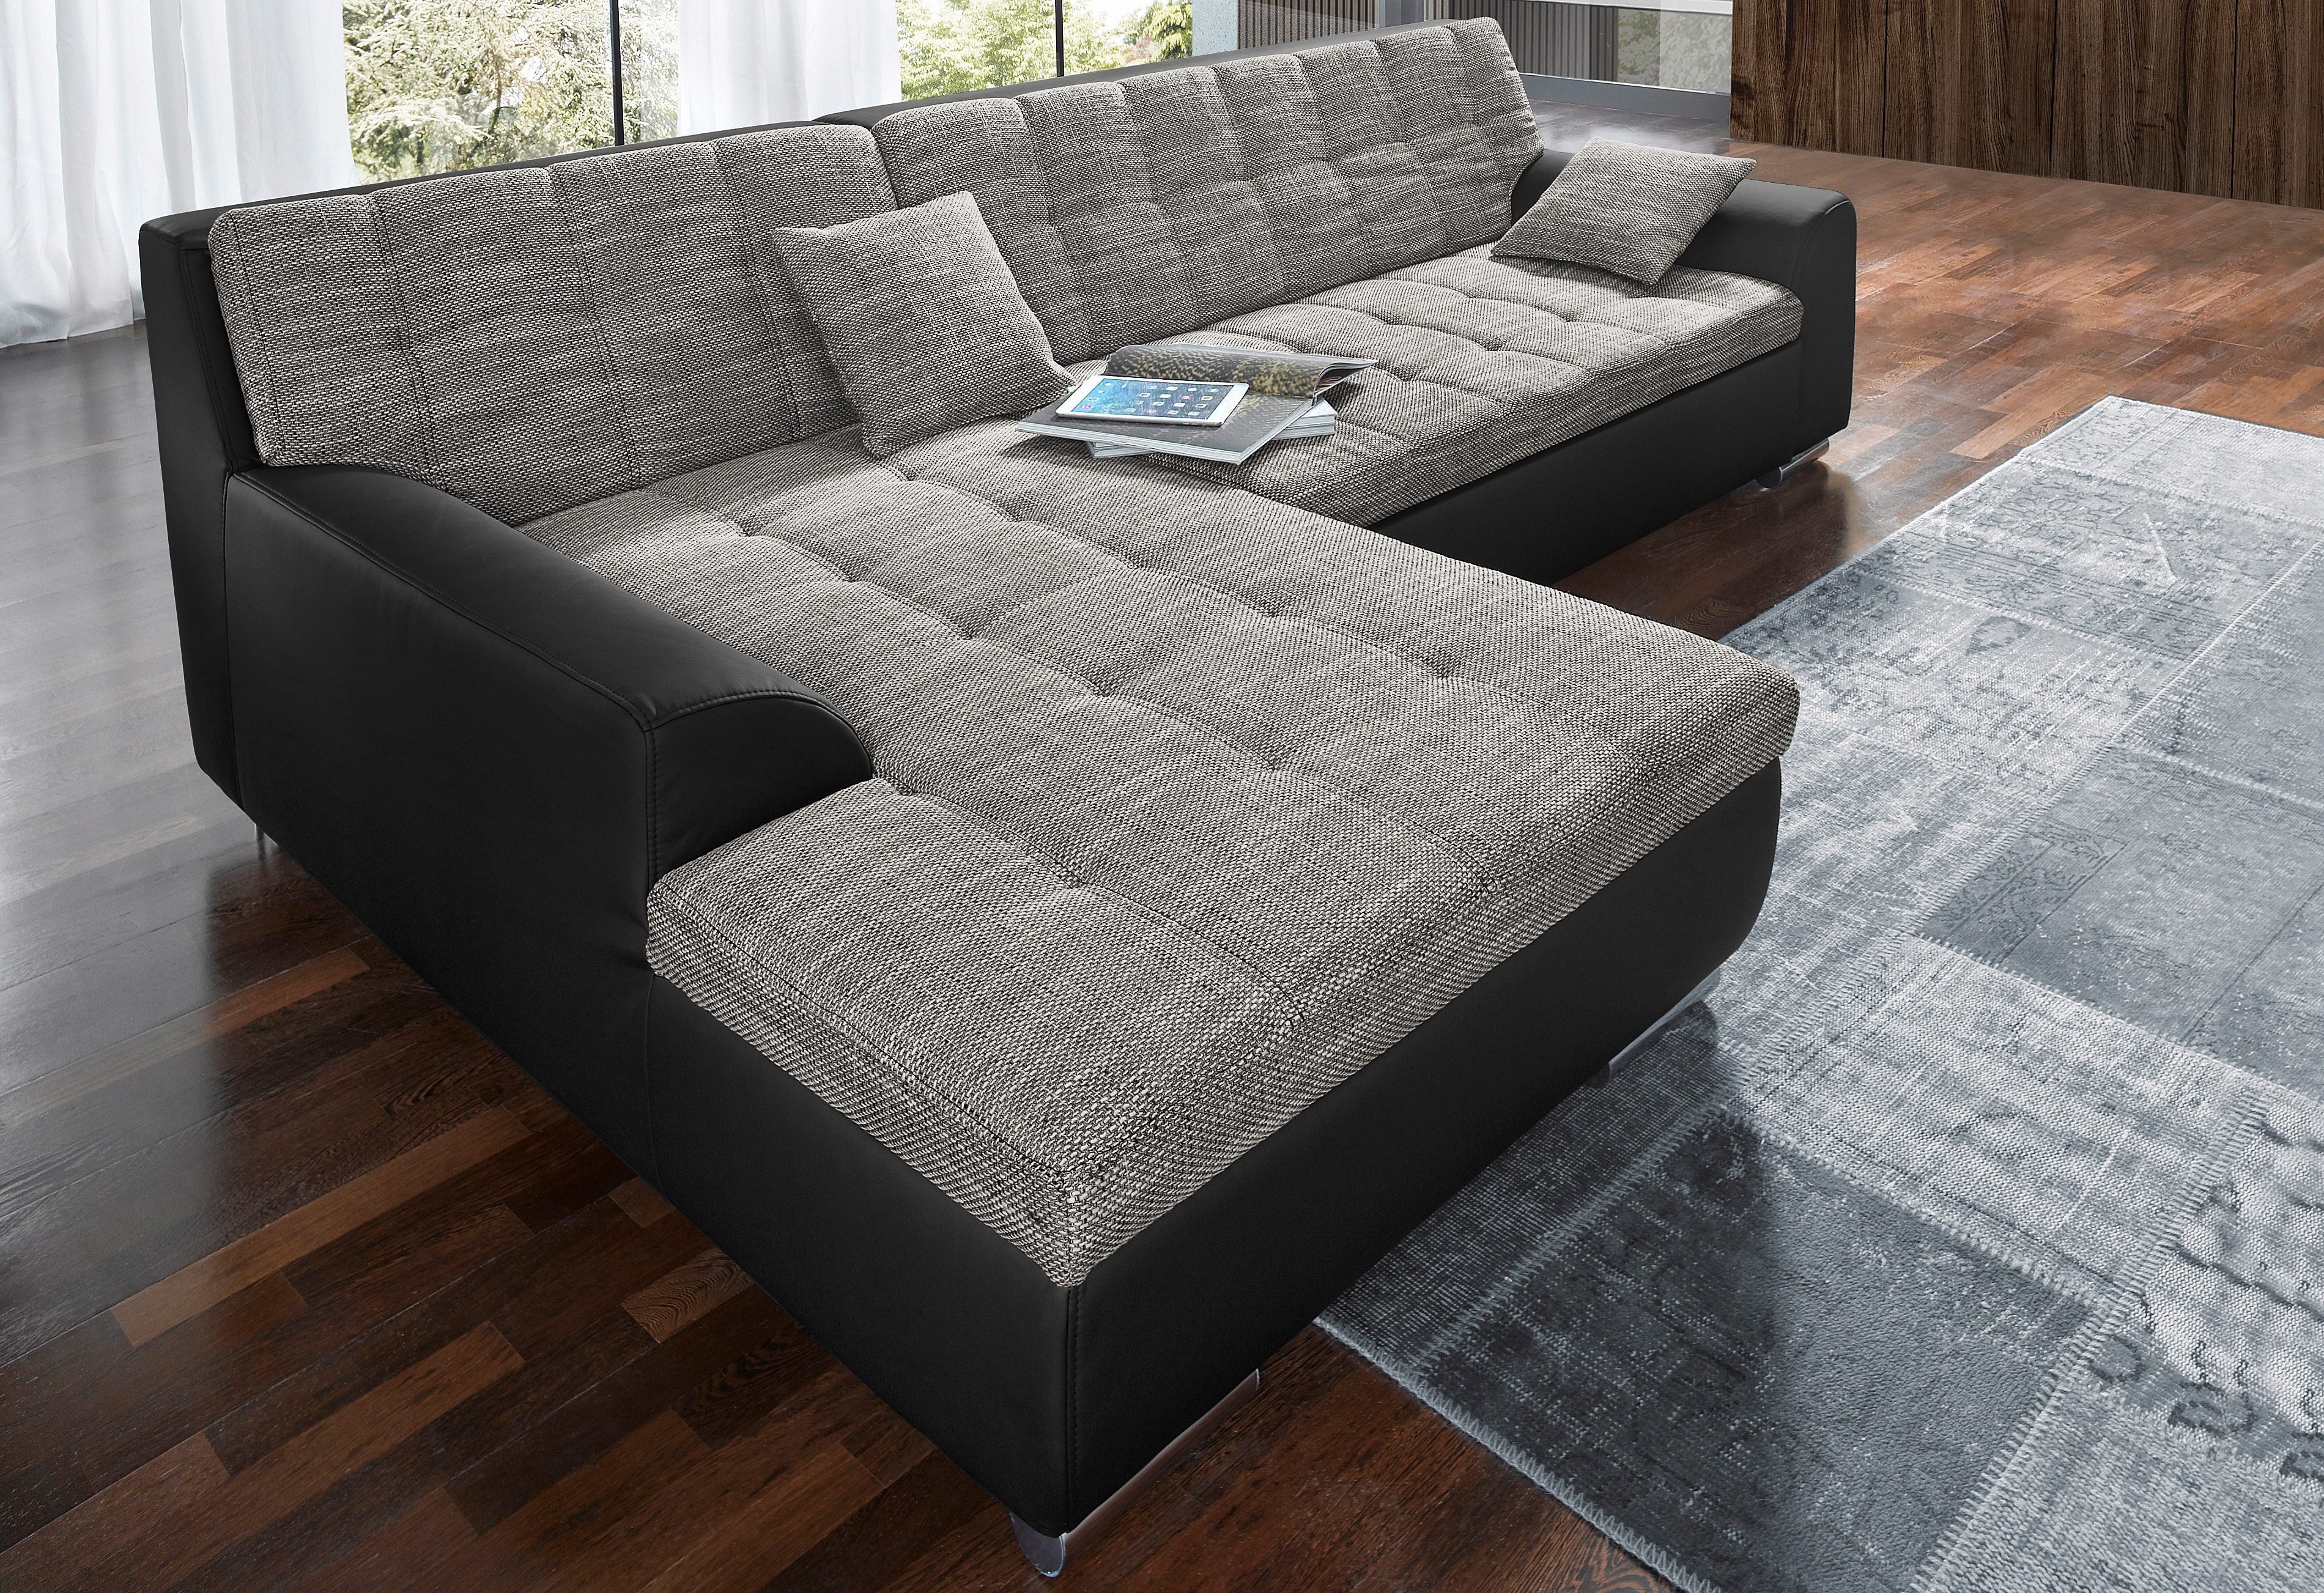 Ecksofa Bettfunktion, mit wahlweise Treviso, Cord in DOMO collection auch